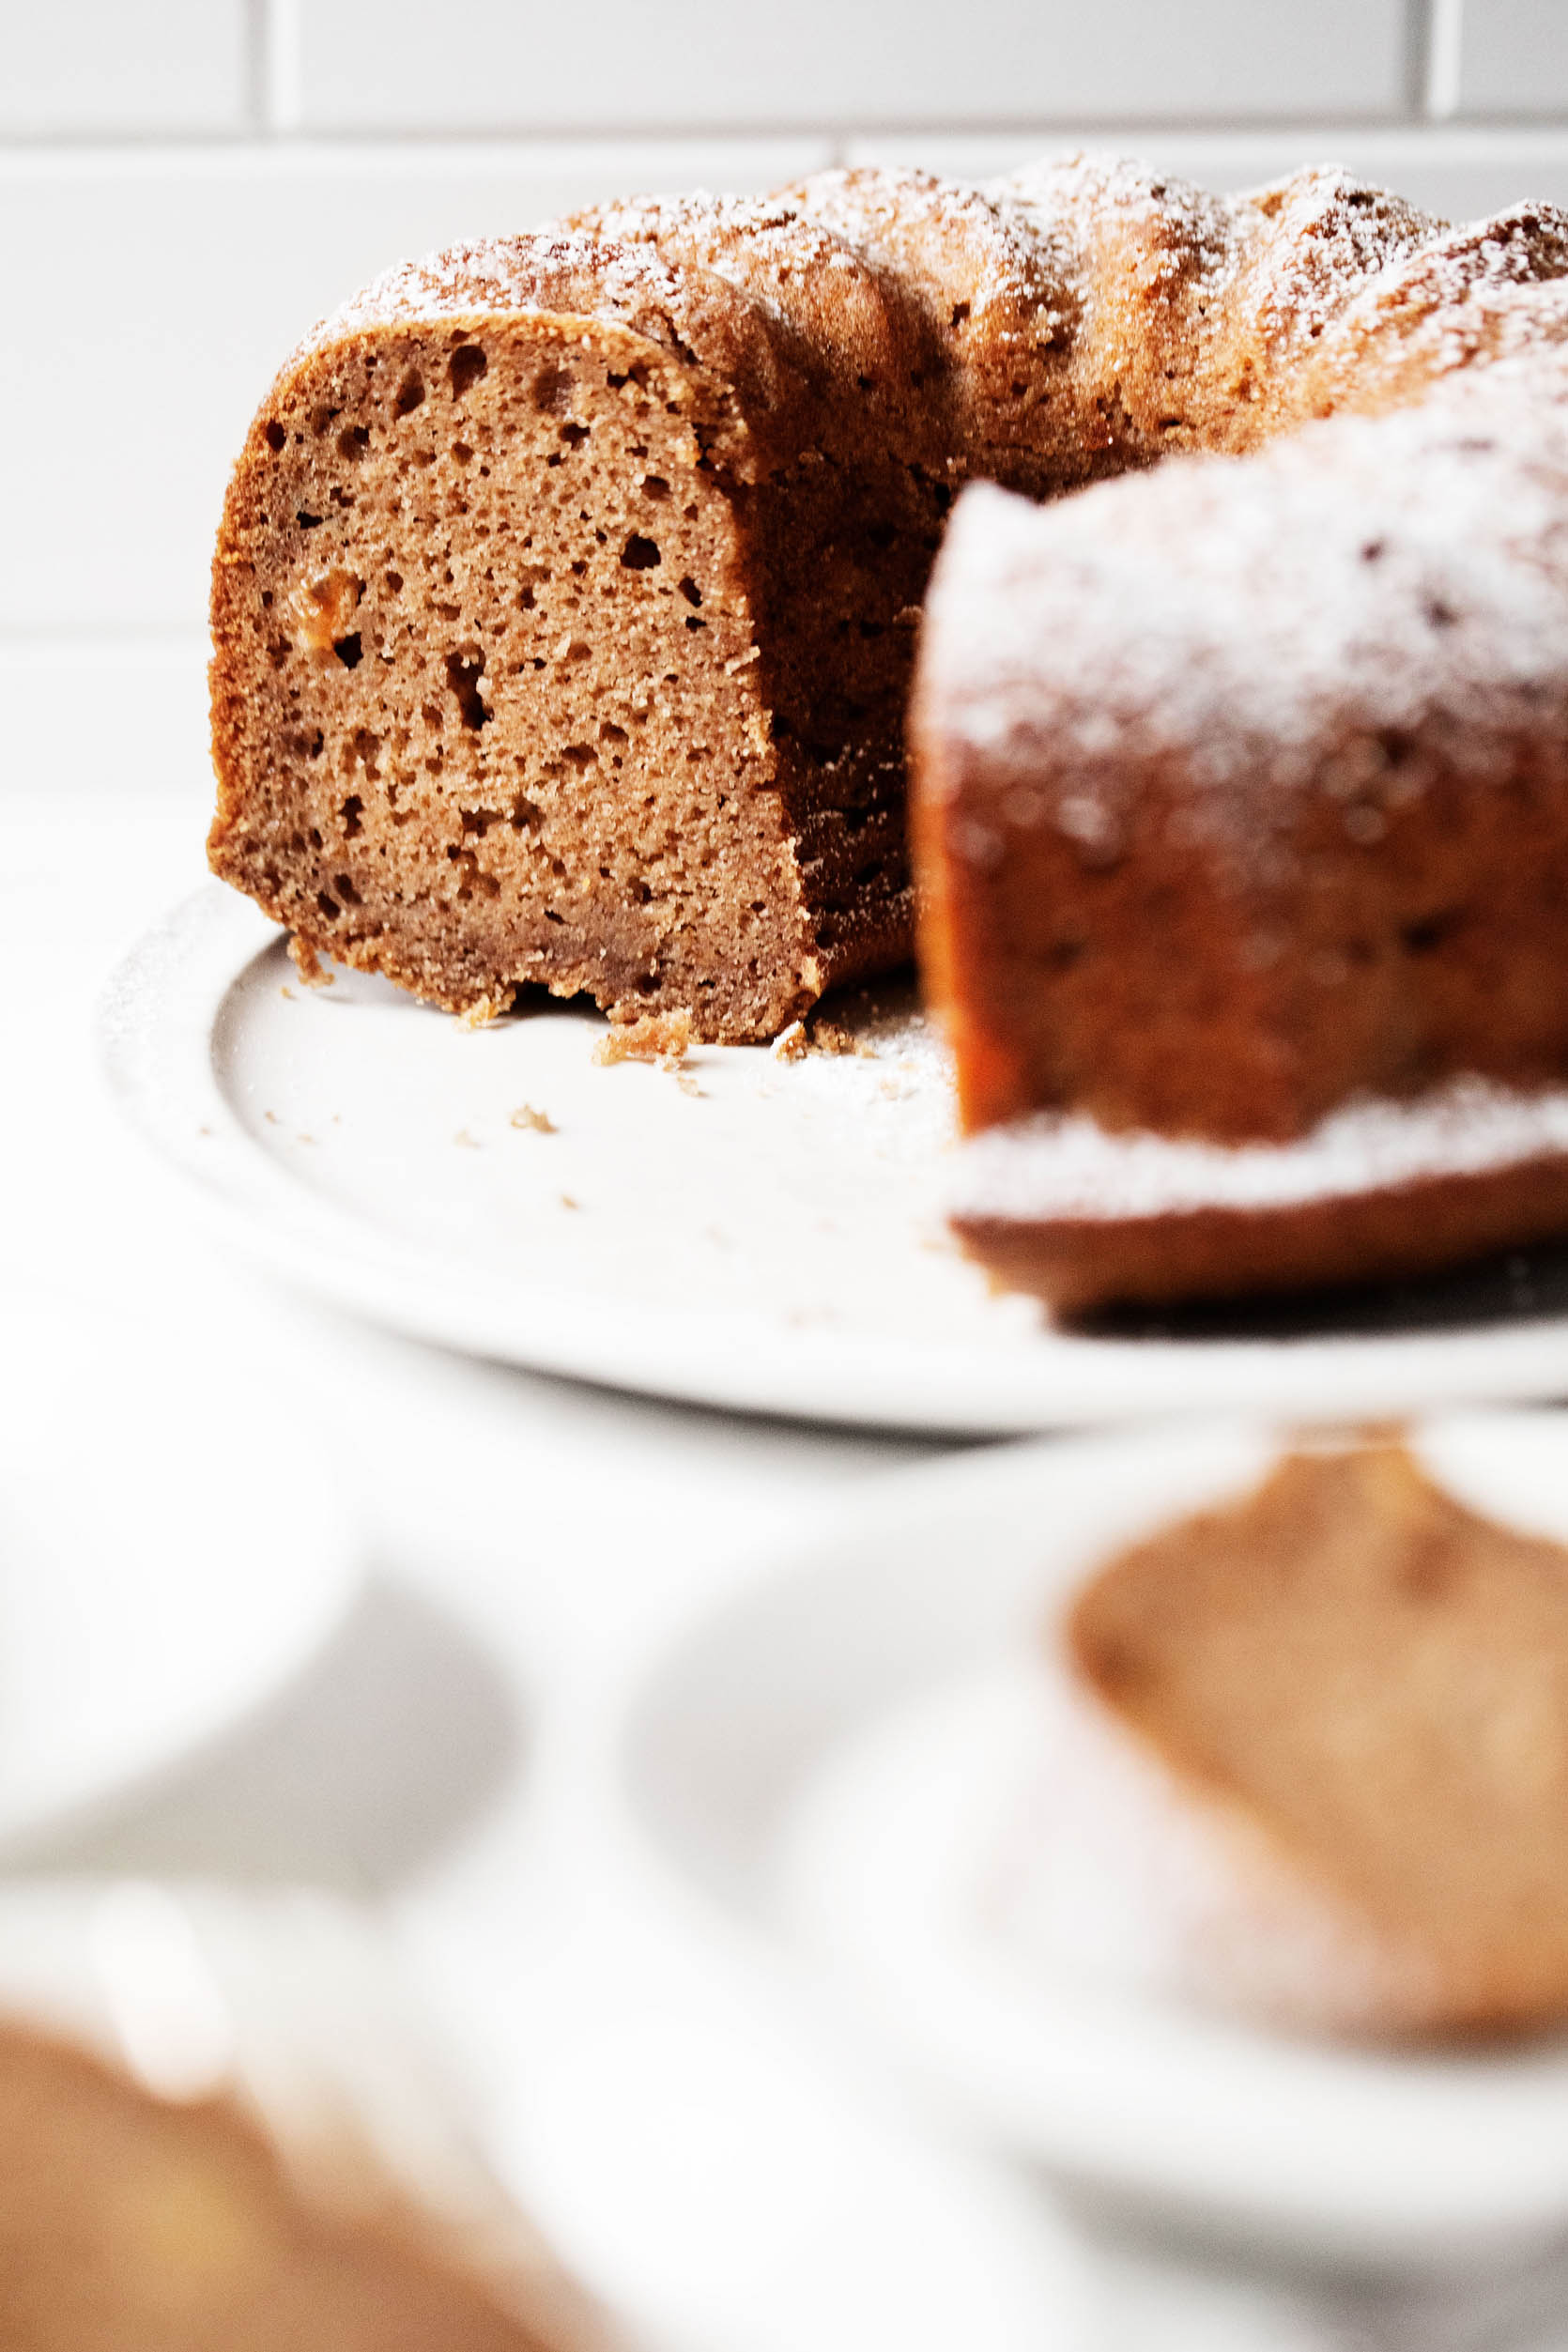 A large, white plate has been topped with a round applesauce spice bundt cake. A few slices of the cake peek out in the foreground.